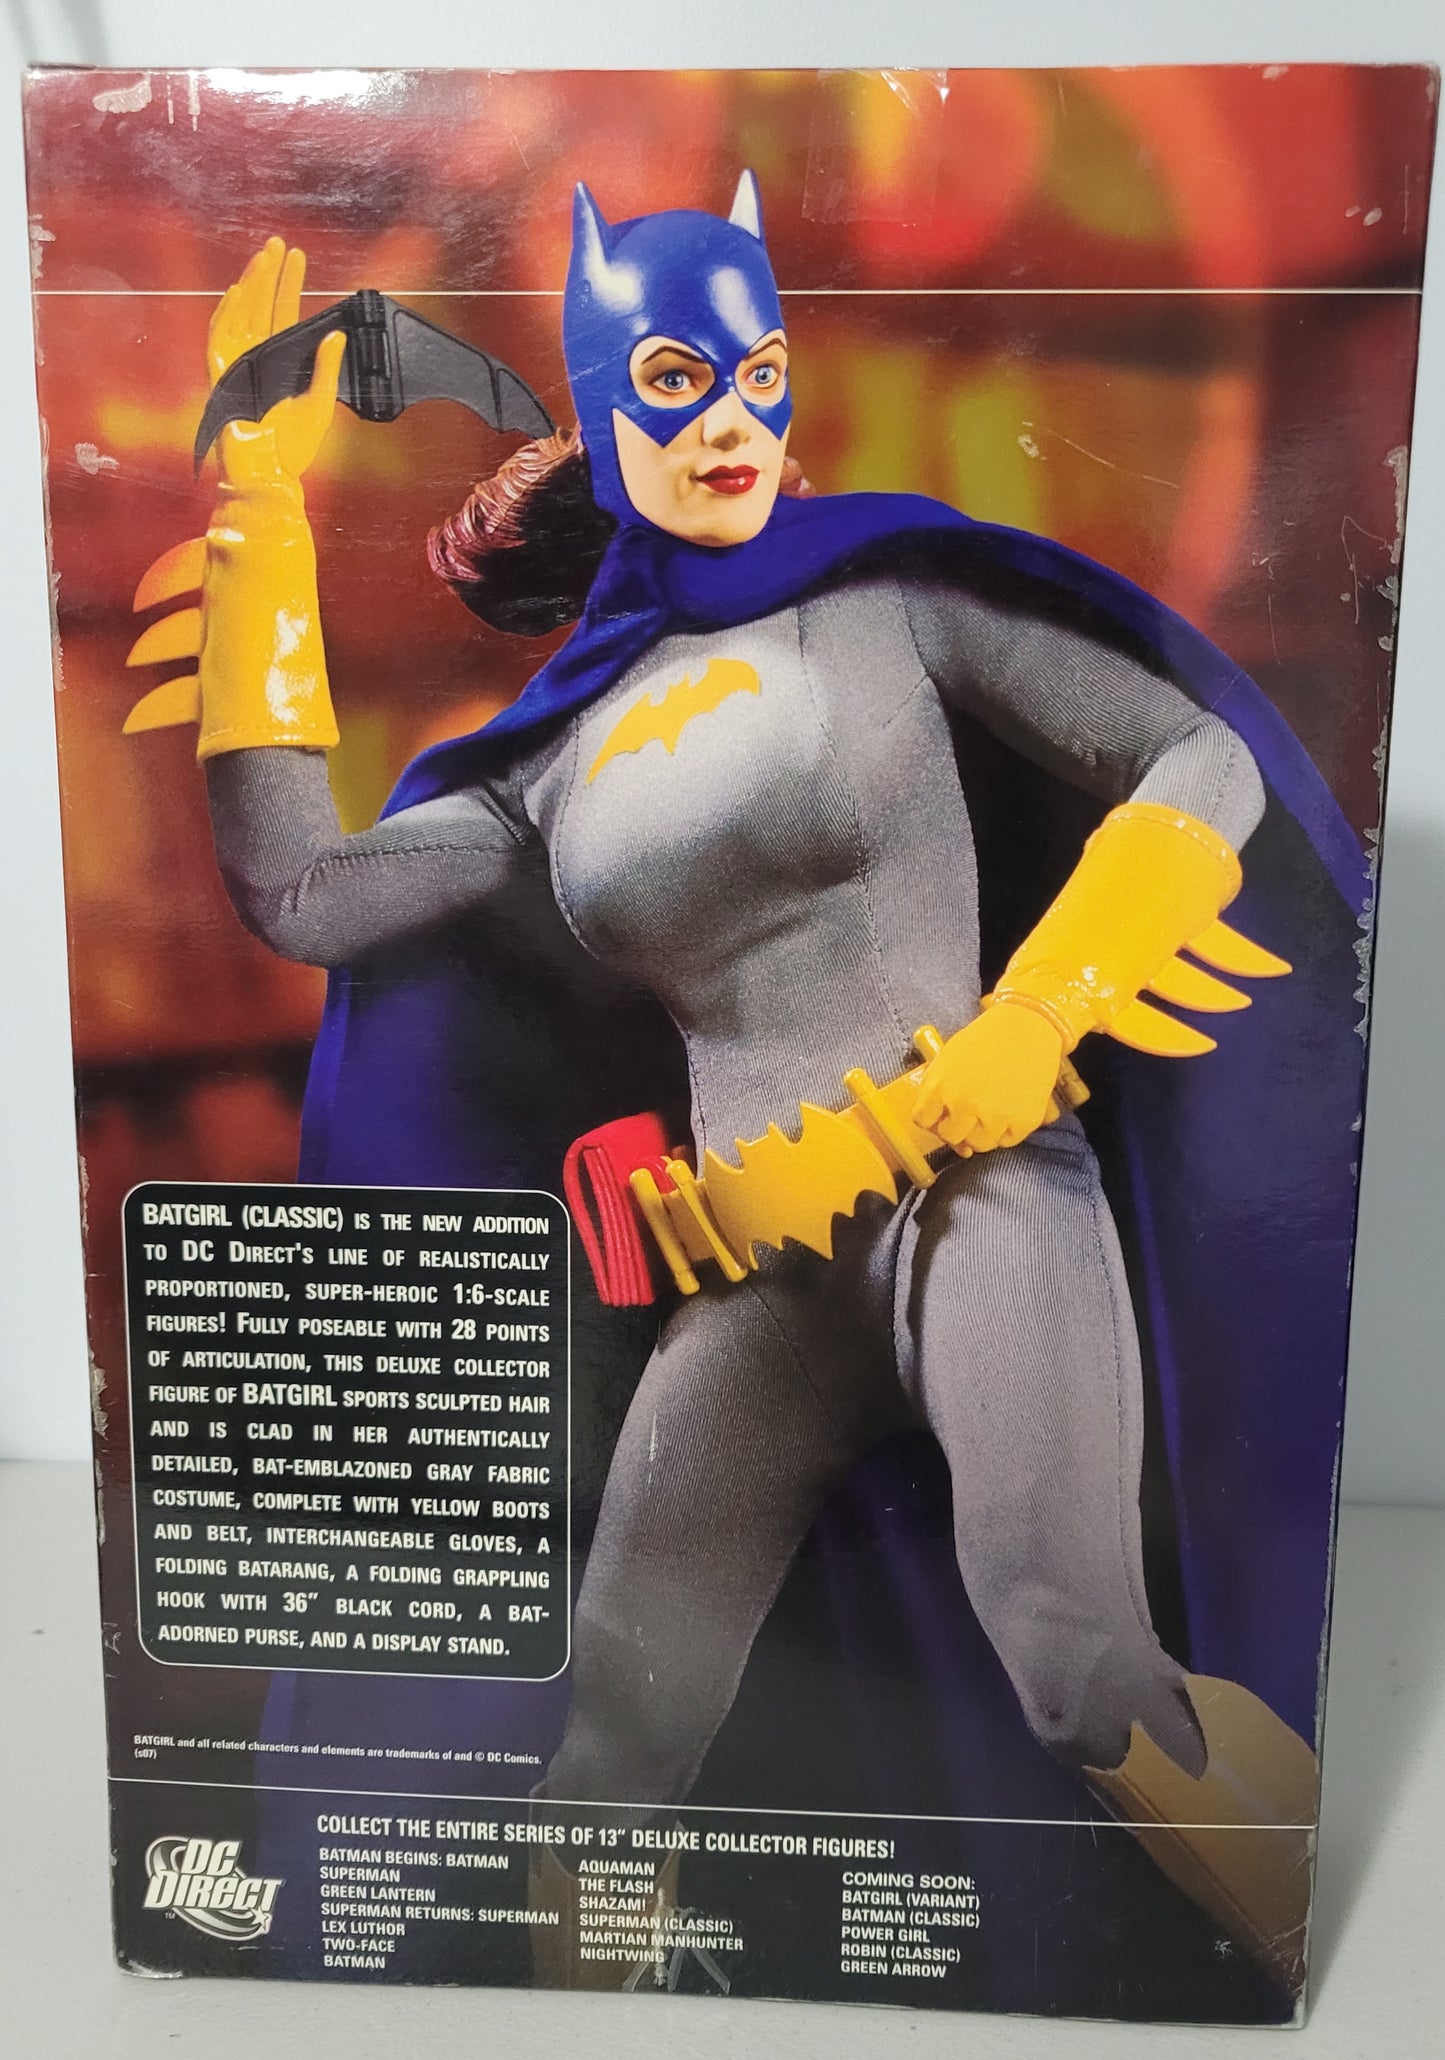 DC Direct: Classic Batgirl 13" Deluxe Collector Figure